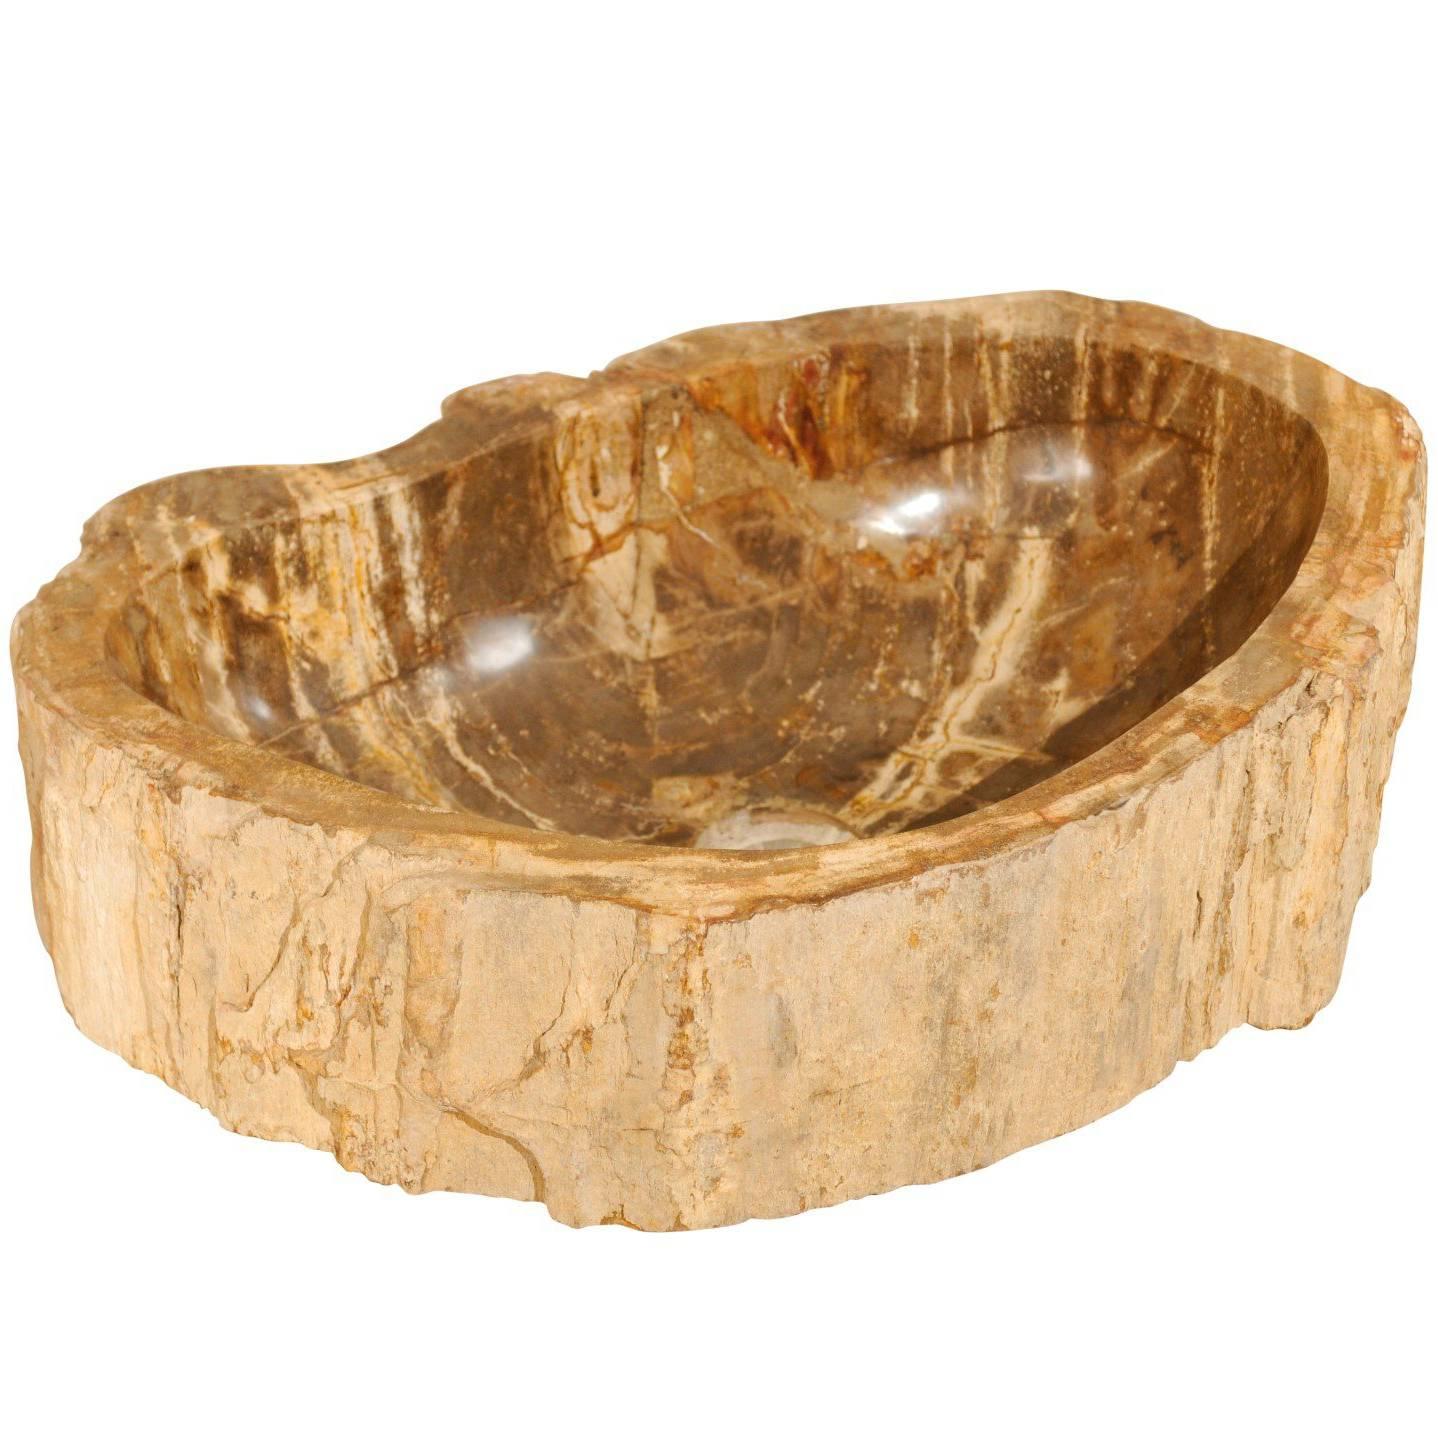 Polished Petrified Wood Sink of Neutral Cream, Tan, Light Brown and Beige Hues